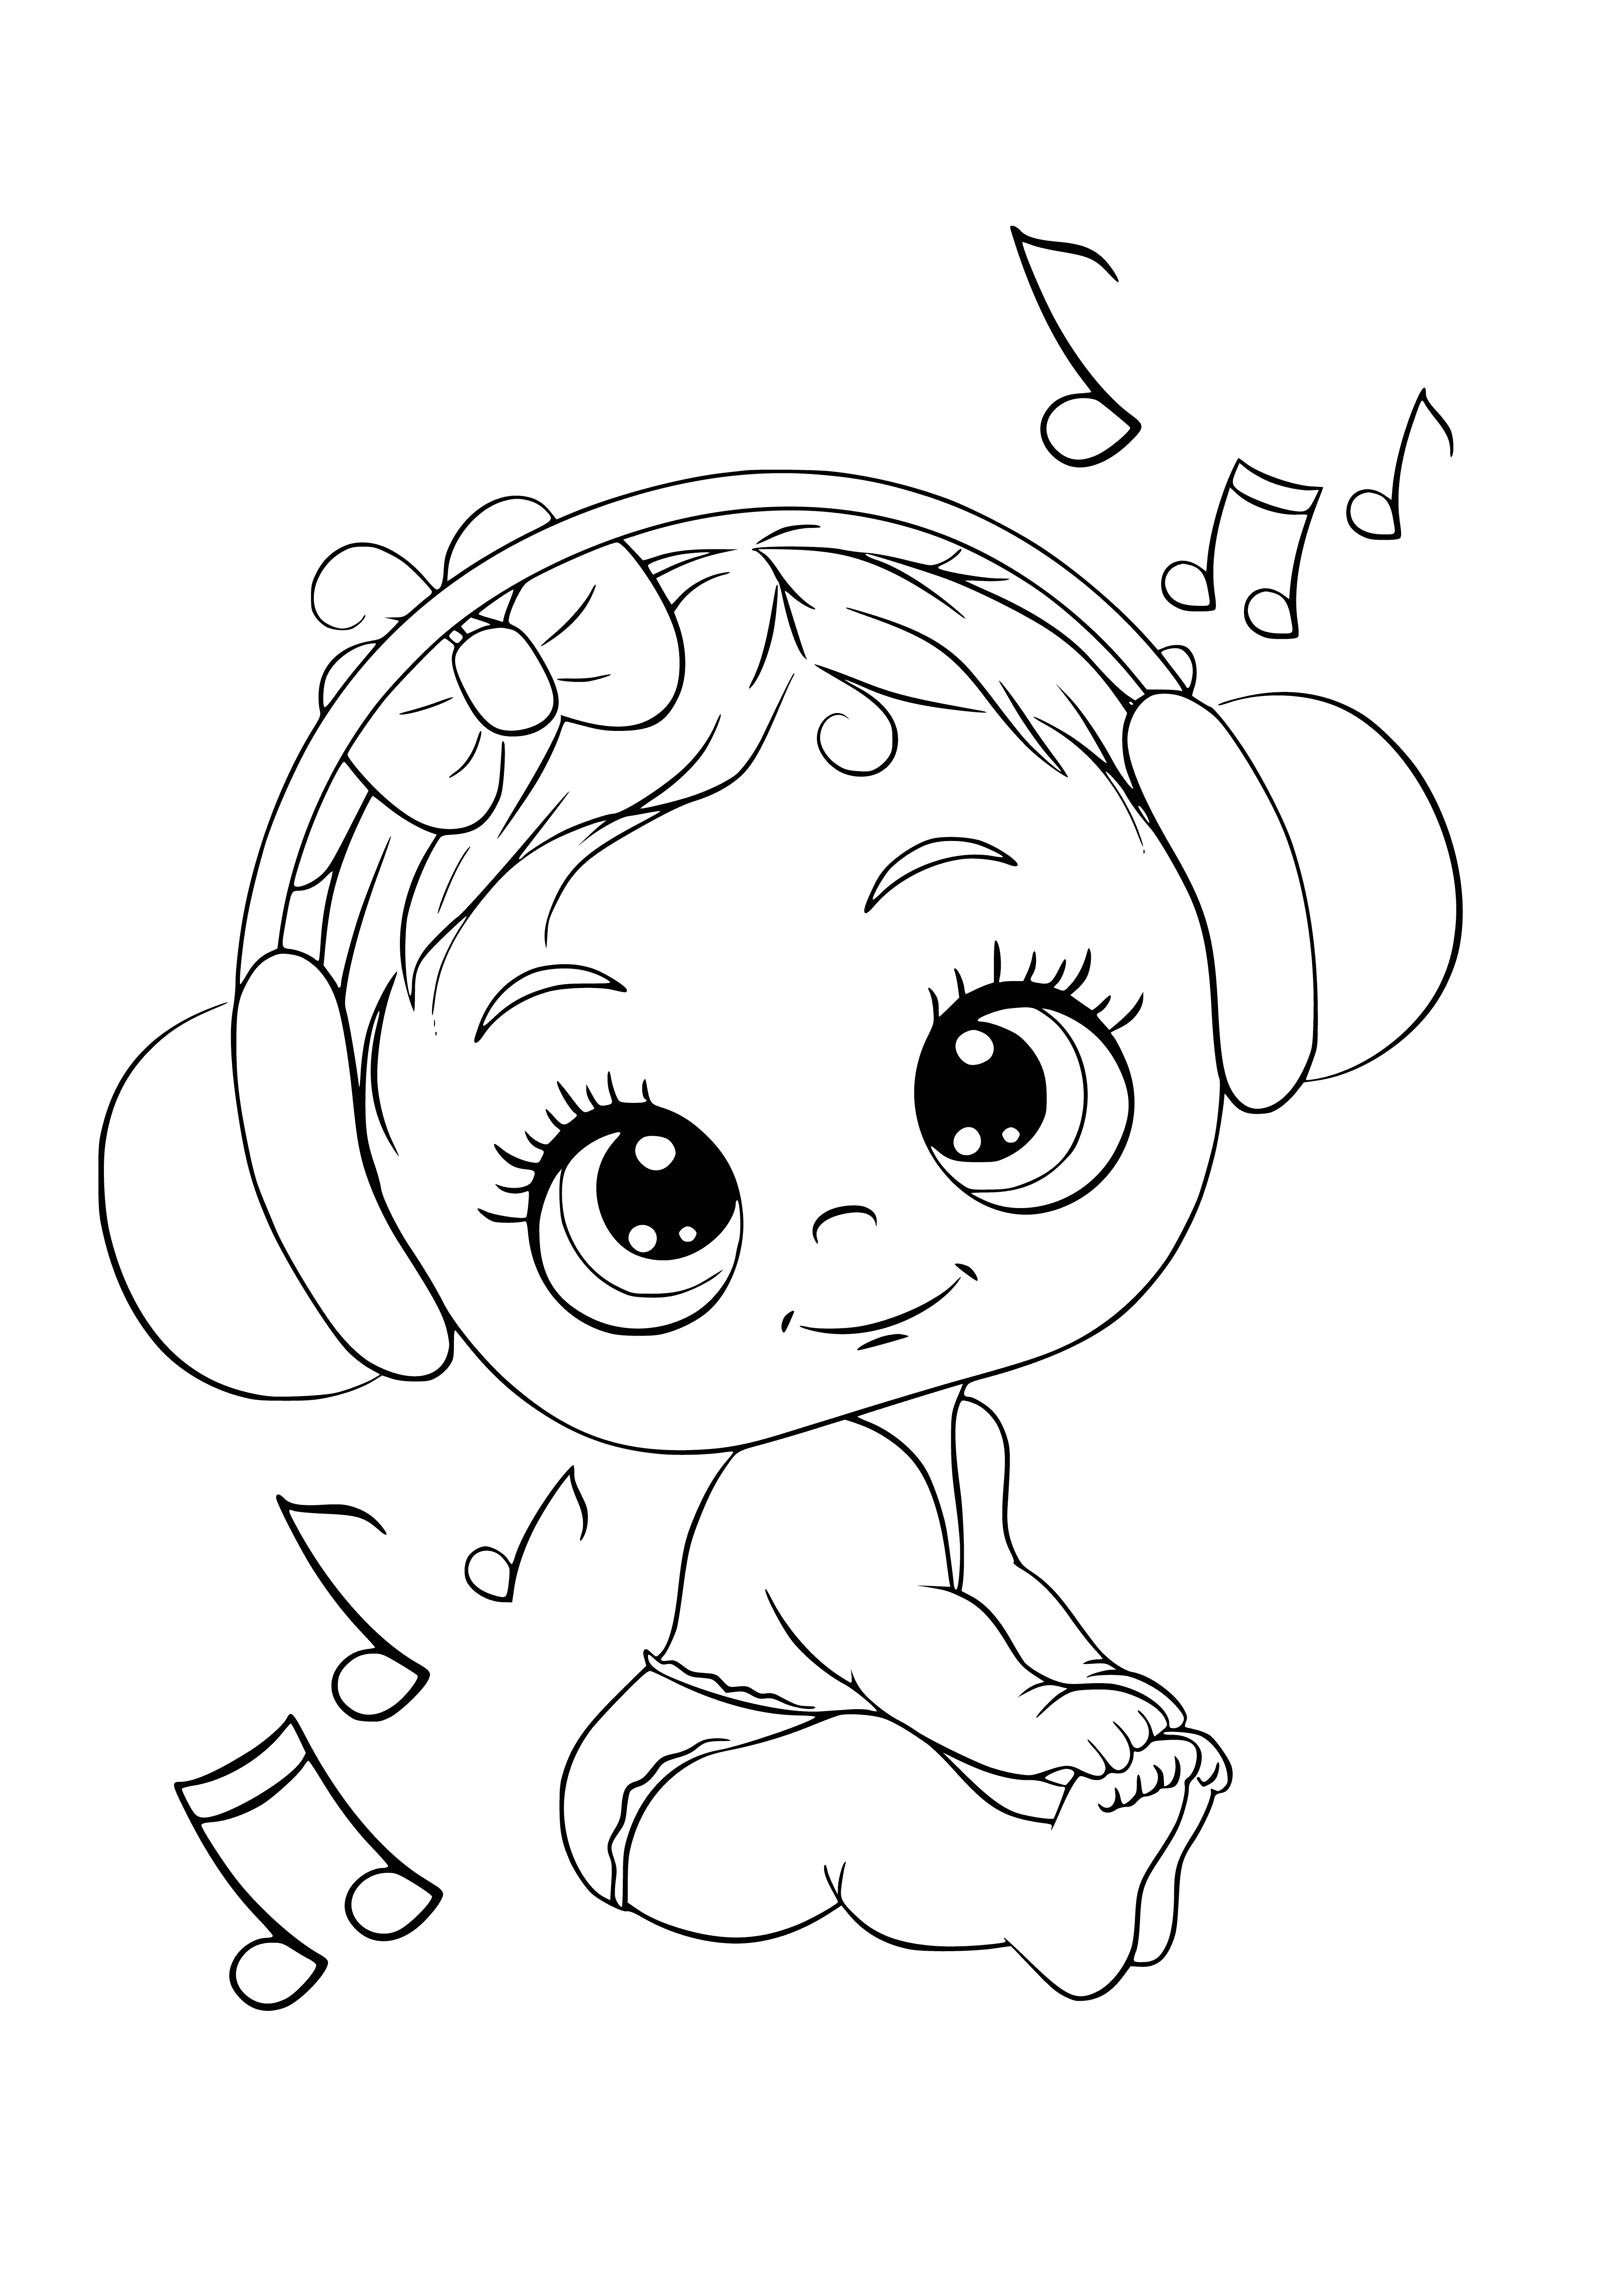 Kid listening to music coloring page